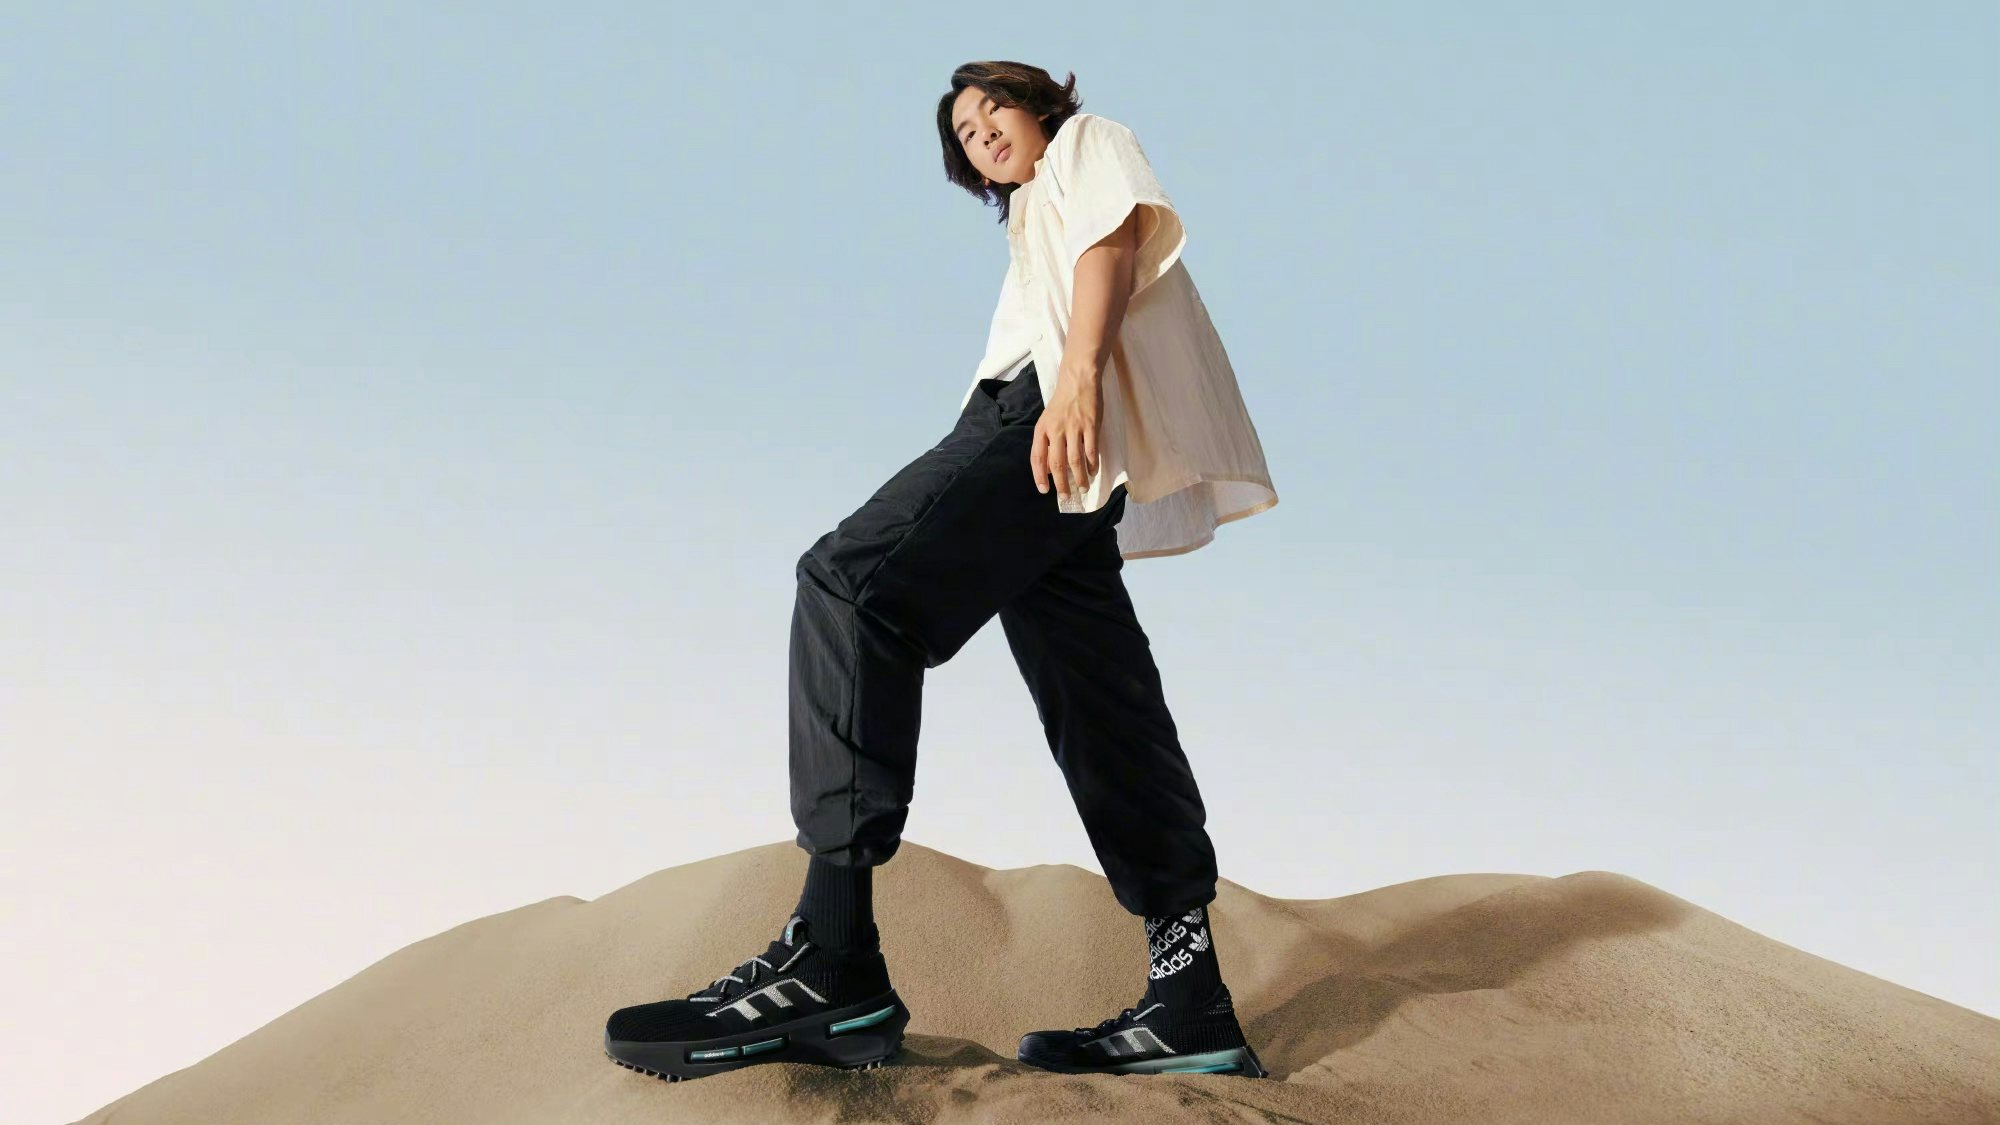 China’s sportswear market is surging thanks to the gospel according to fitness KOLs. Who are the top influencers driving this boom? Photo: Adidas Originals 